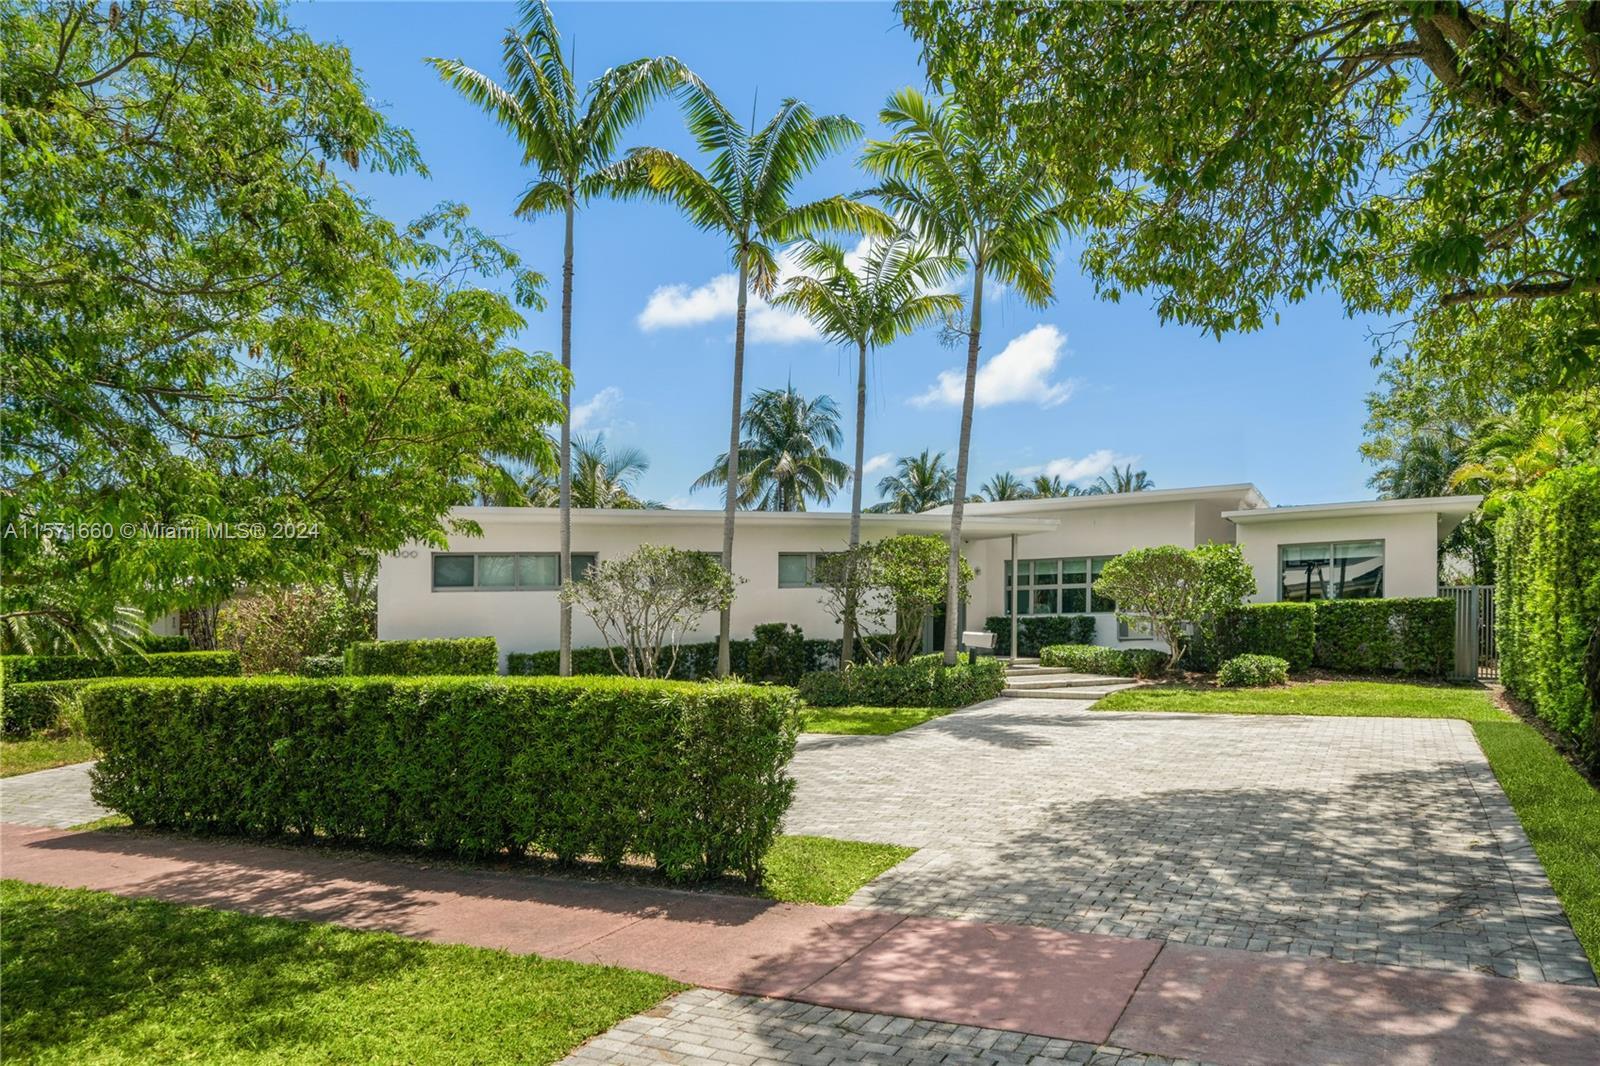 Tucked away inside the guard gated island of Normandy Shores, this home is the epitome of a timeless